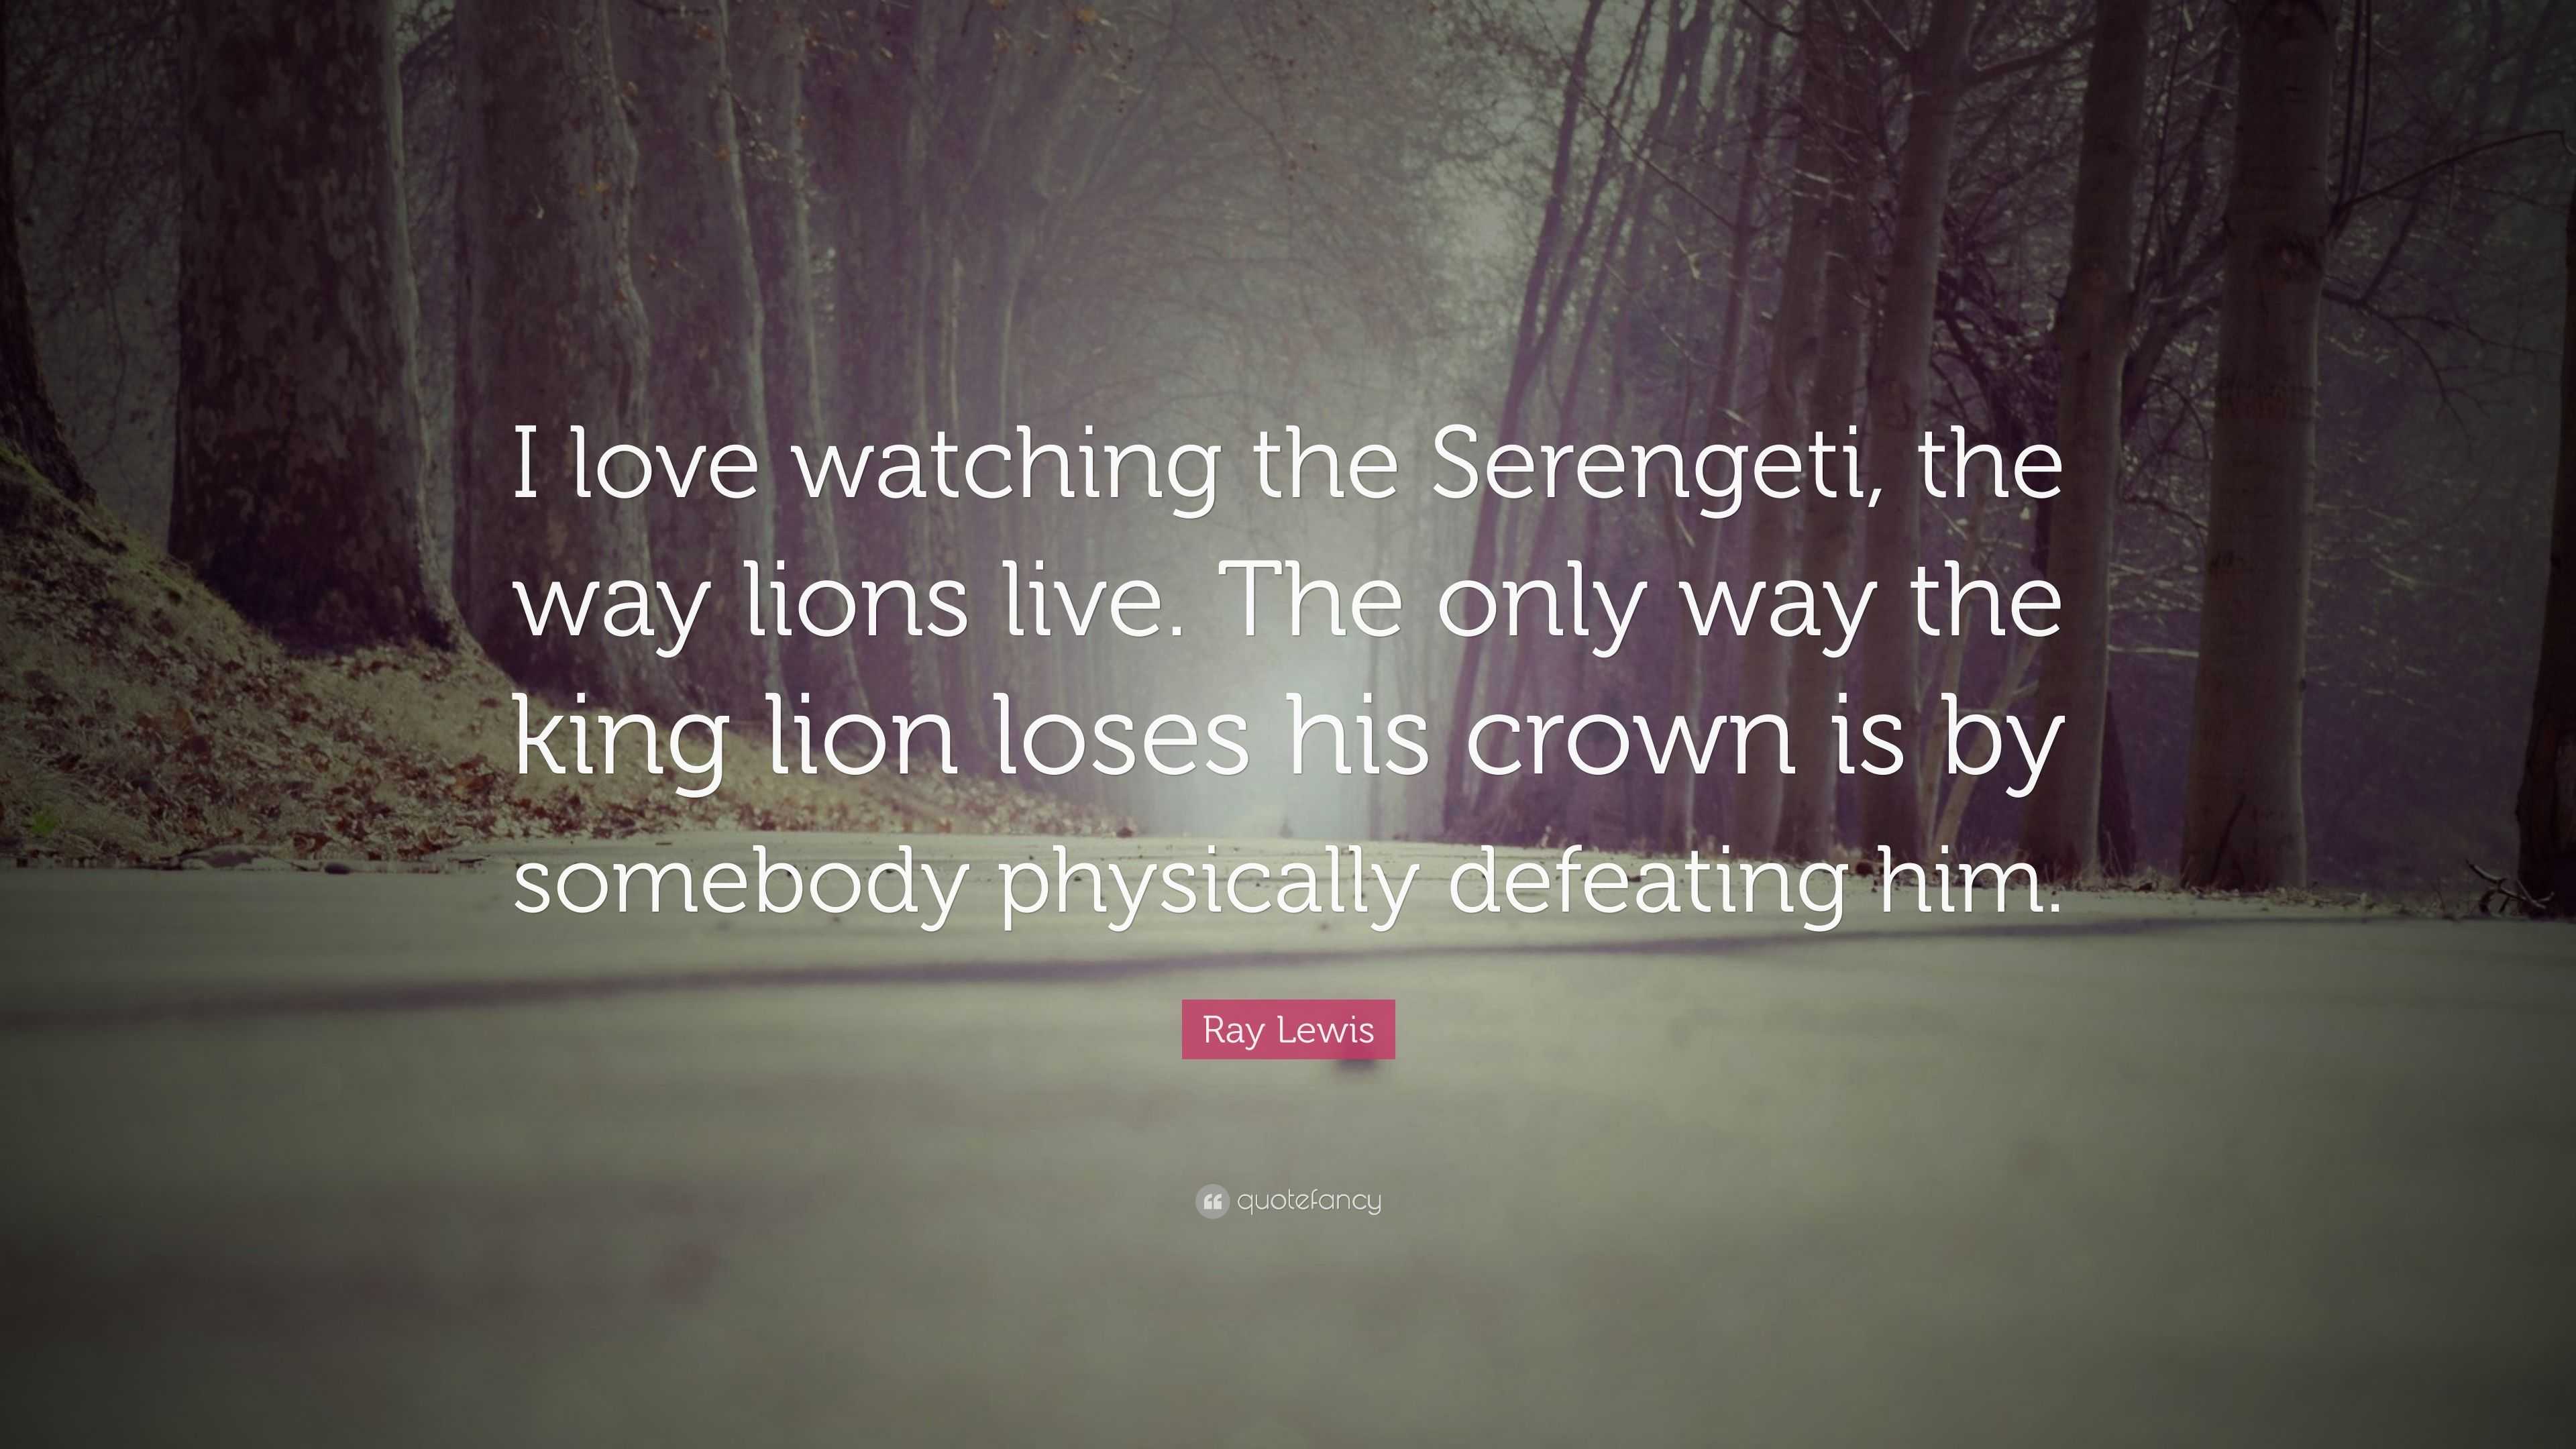 2431447 Ray Lewis Quote I love watching the Serengeti the way lions live